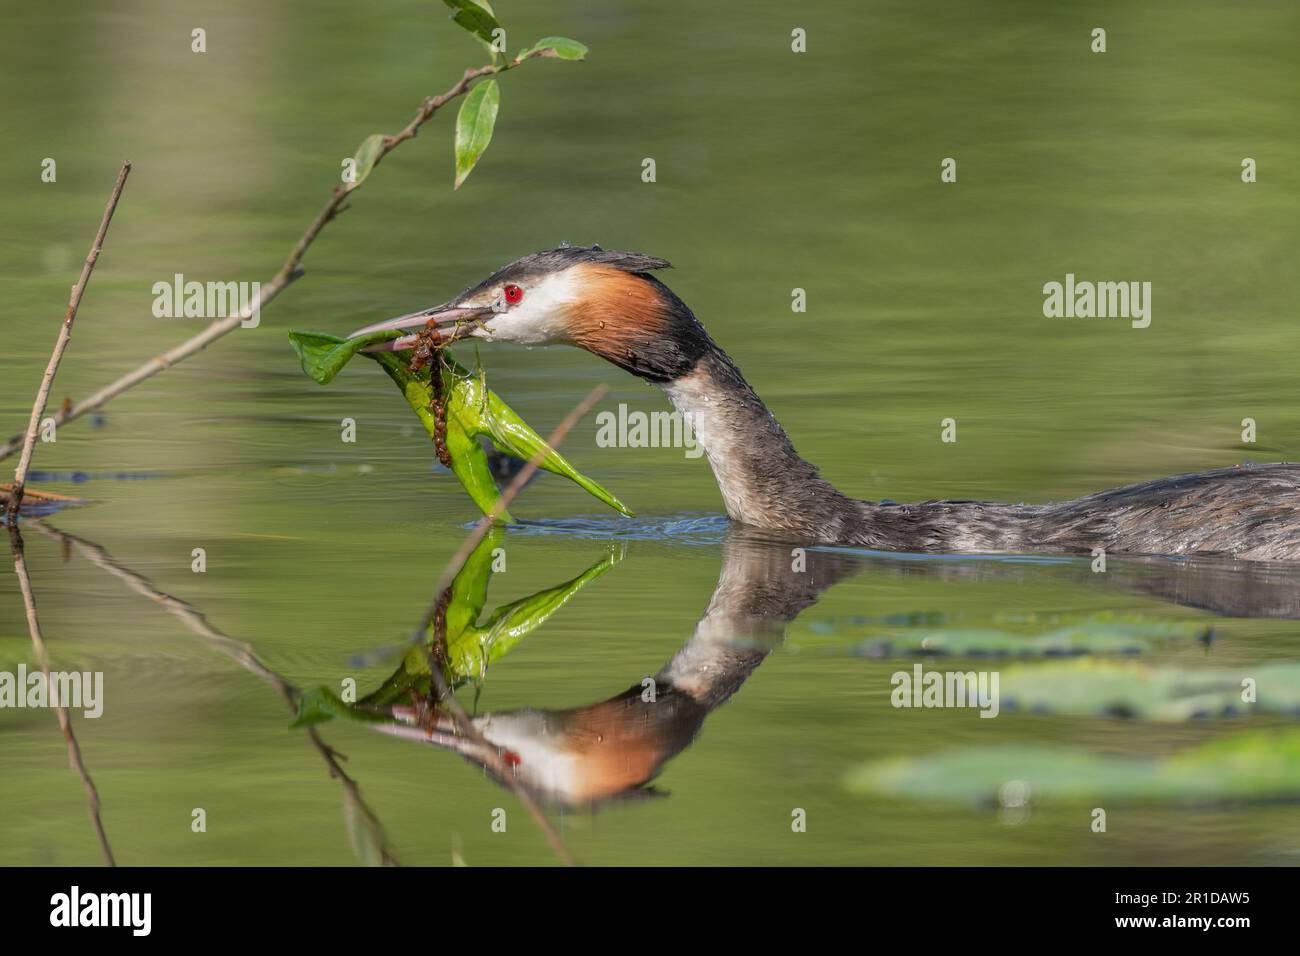 Great Crested Grebe (Podiceps cristatus) on its nest with two eggs. Bas-Rhin, Collectivite europeenne d'Alsace,Grand Est, France. Stock Photo